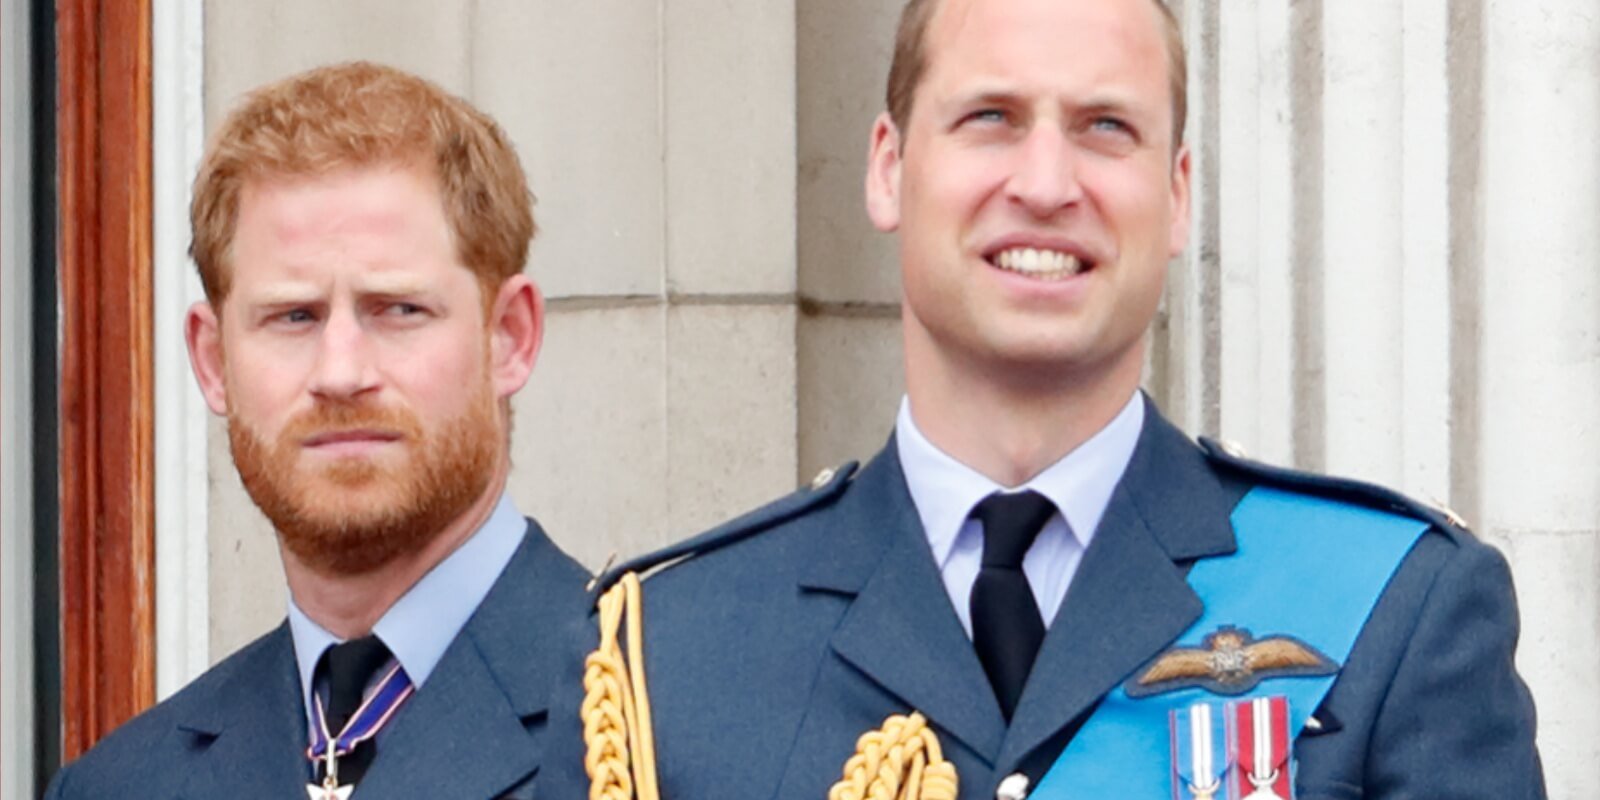 Prince Harry and Prince William watch a flypast to mark the centenary of the Royal Air Force from the balcony of Buckingham Palace on July 10, 2018 in London, England.